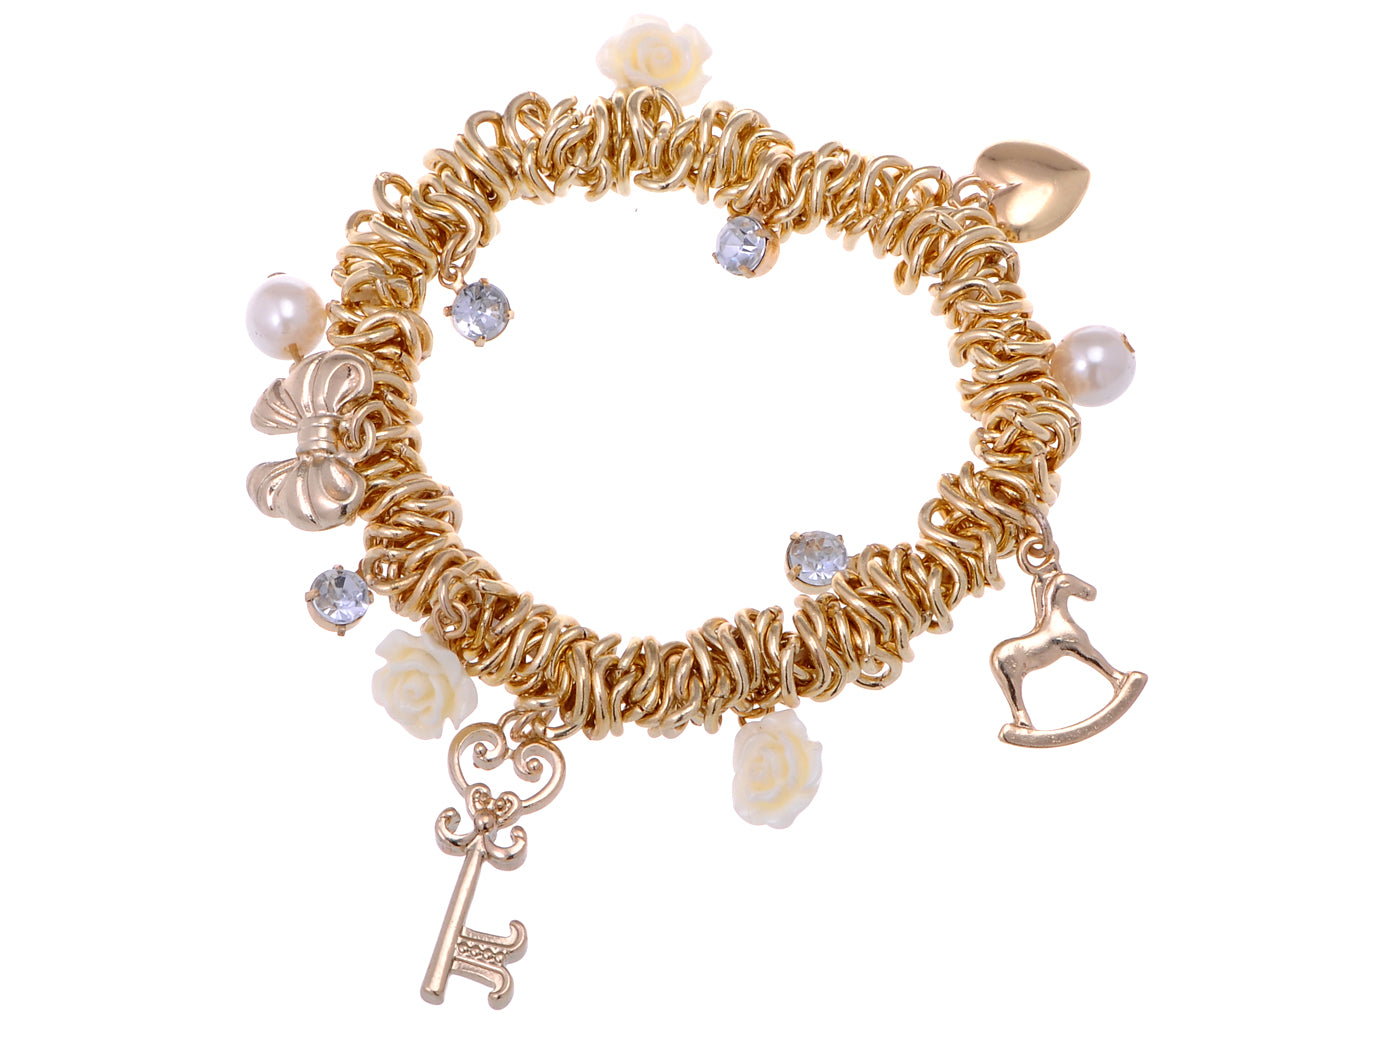 Dangling Charm Expandable Bracelet Accented With Sparkling S